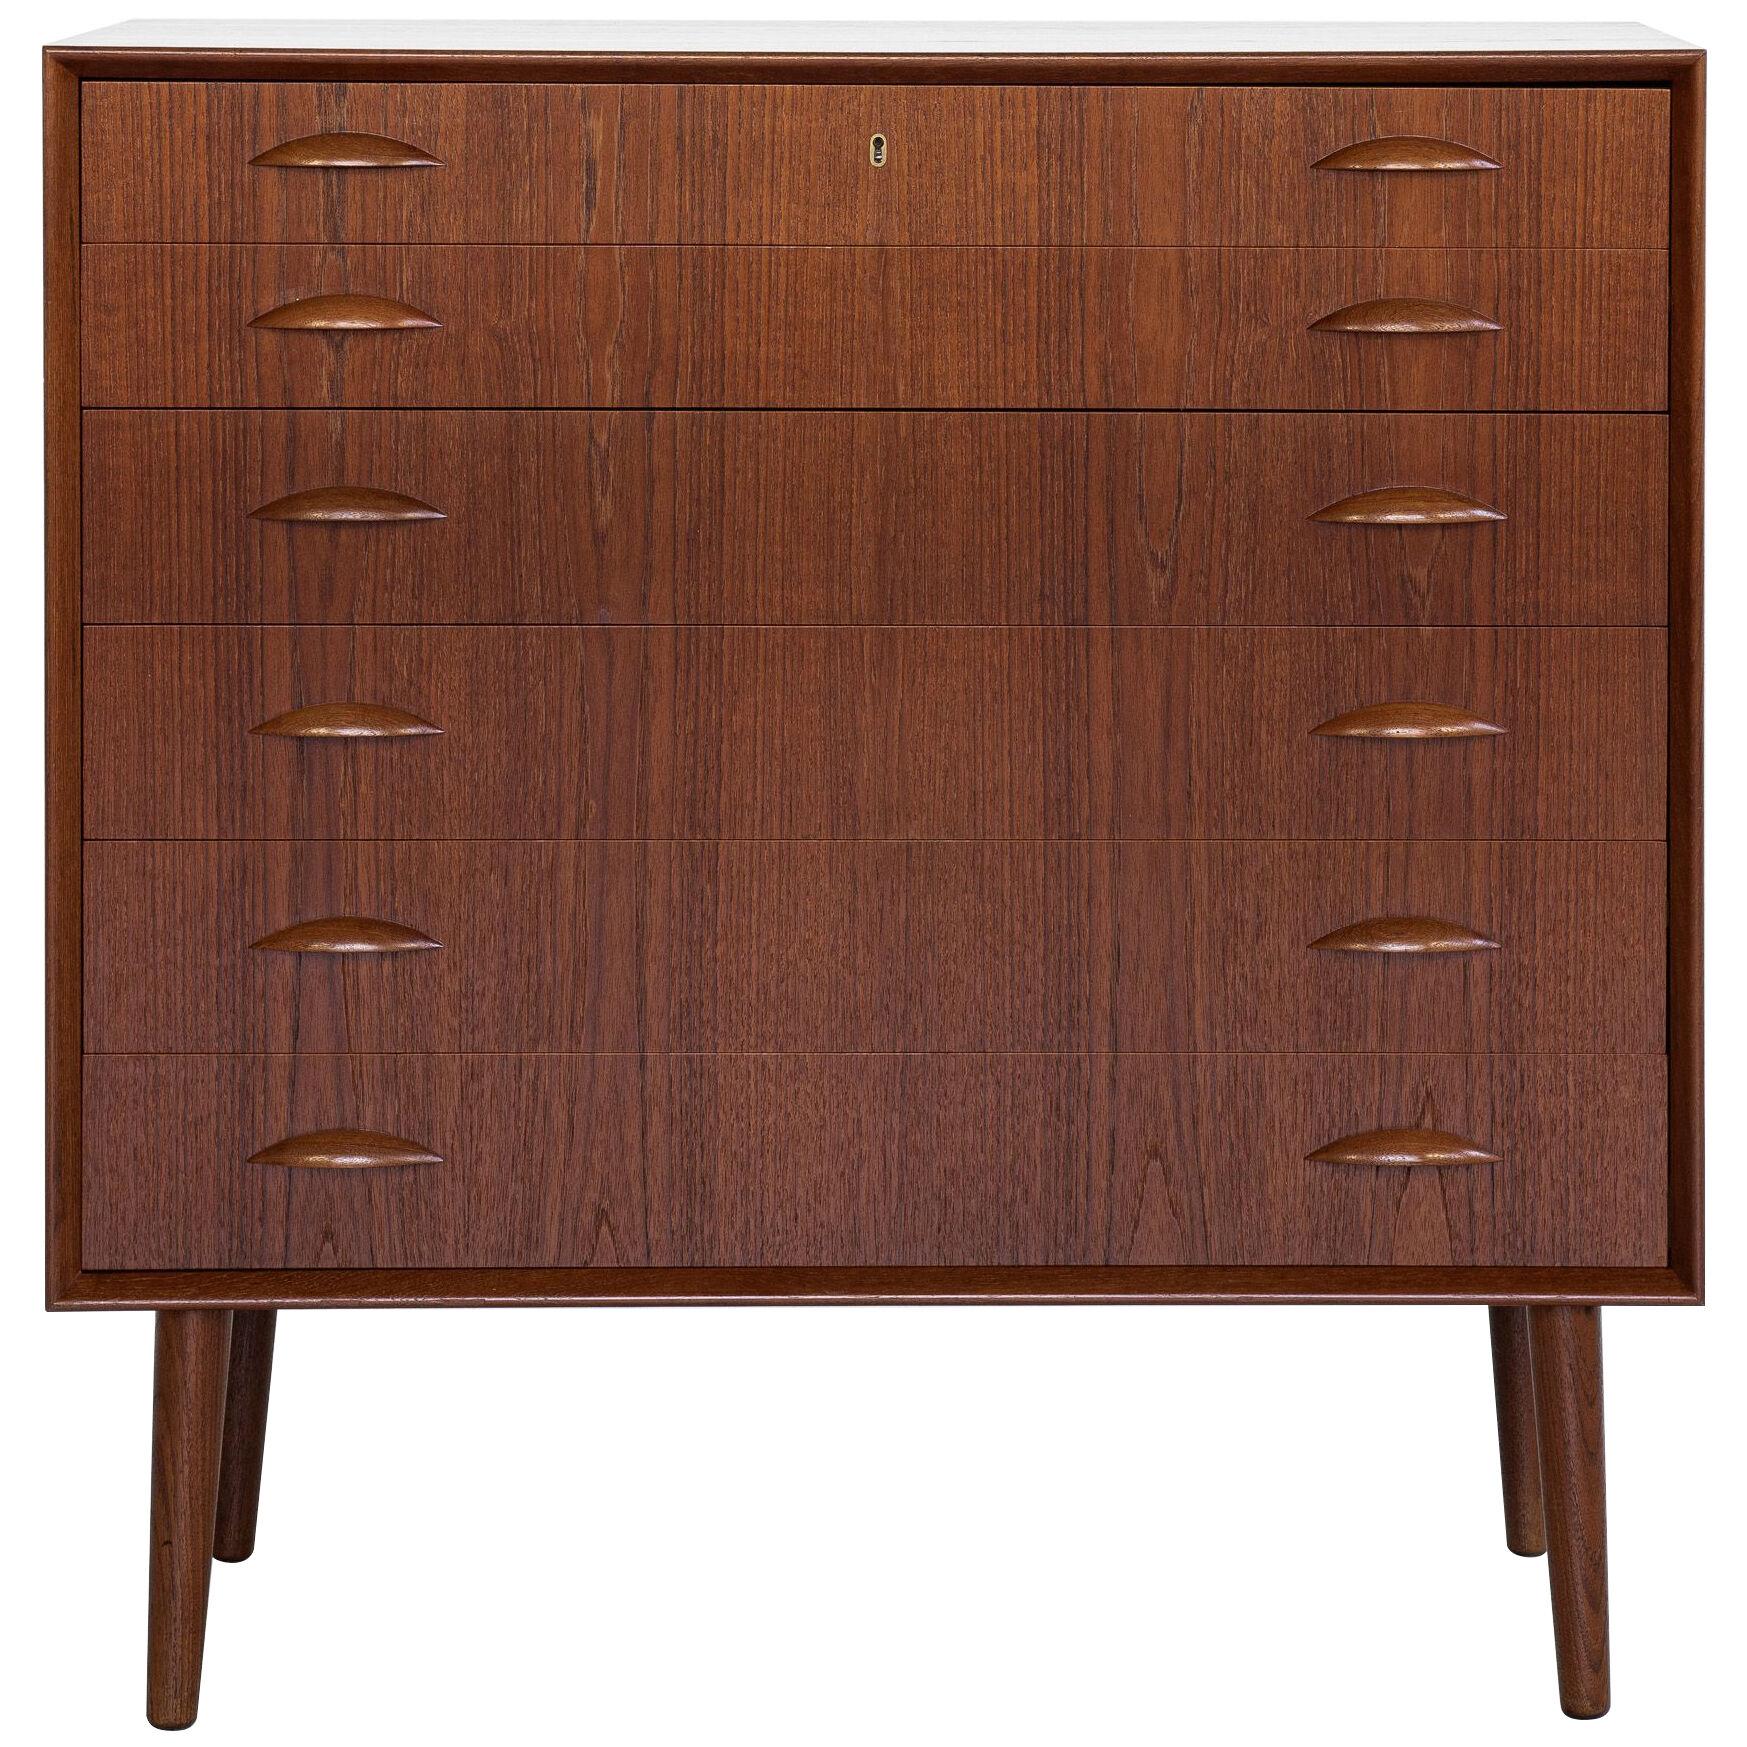 Midcentury Danish wider chest of 6 drawers in teak by Johannes Sorth for Nexø